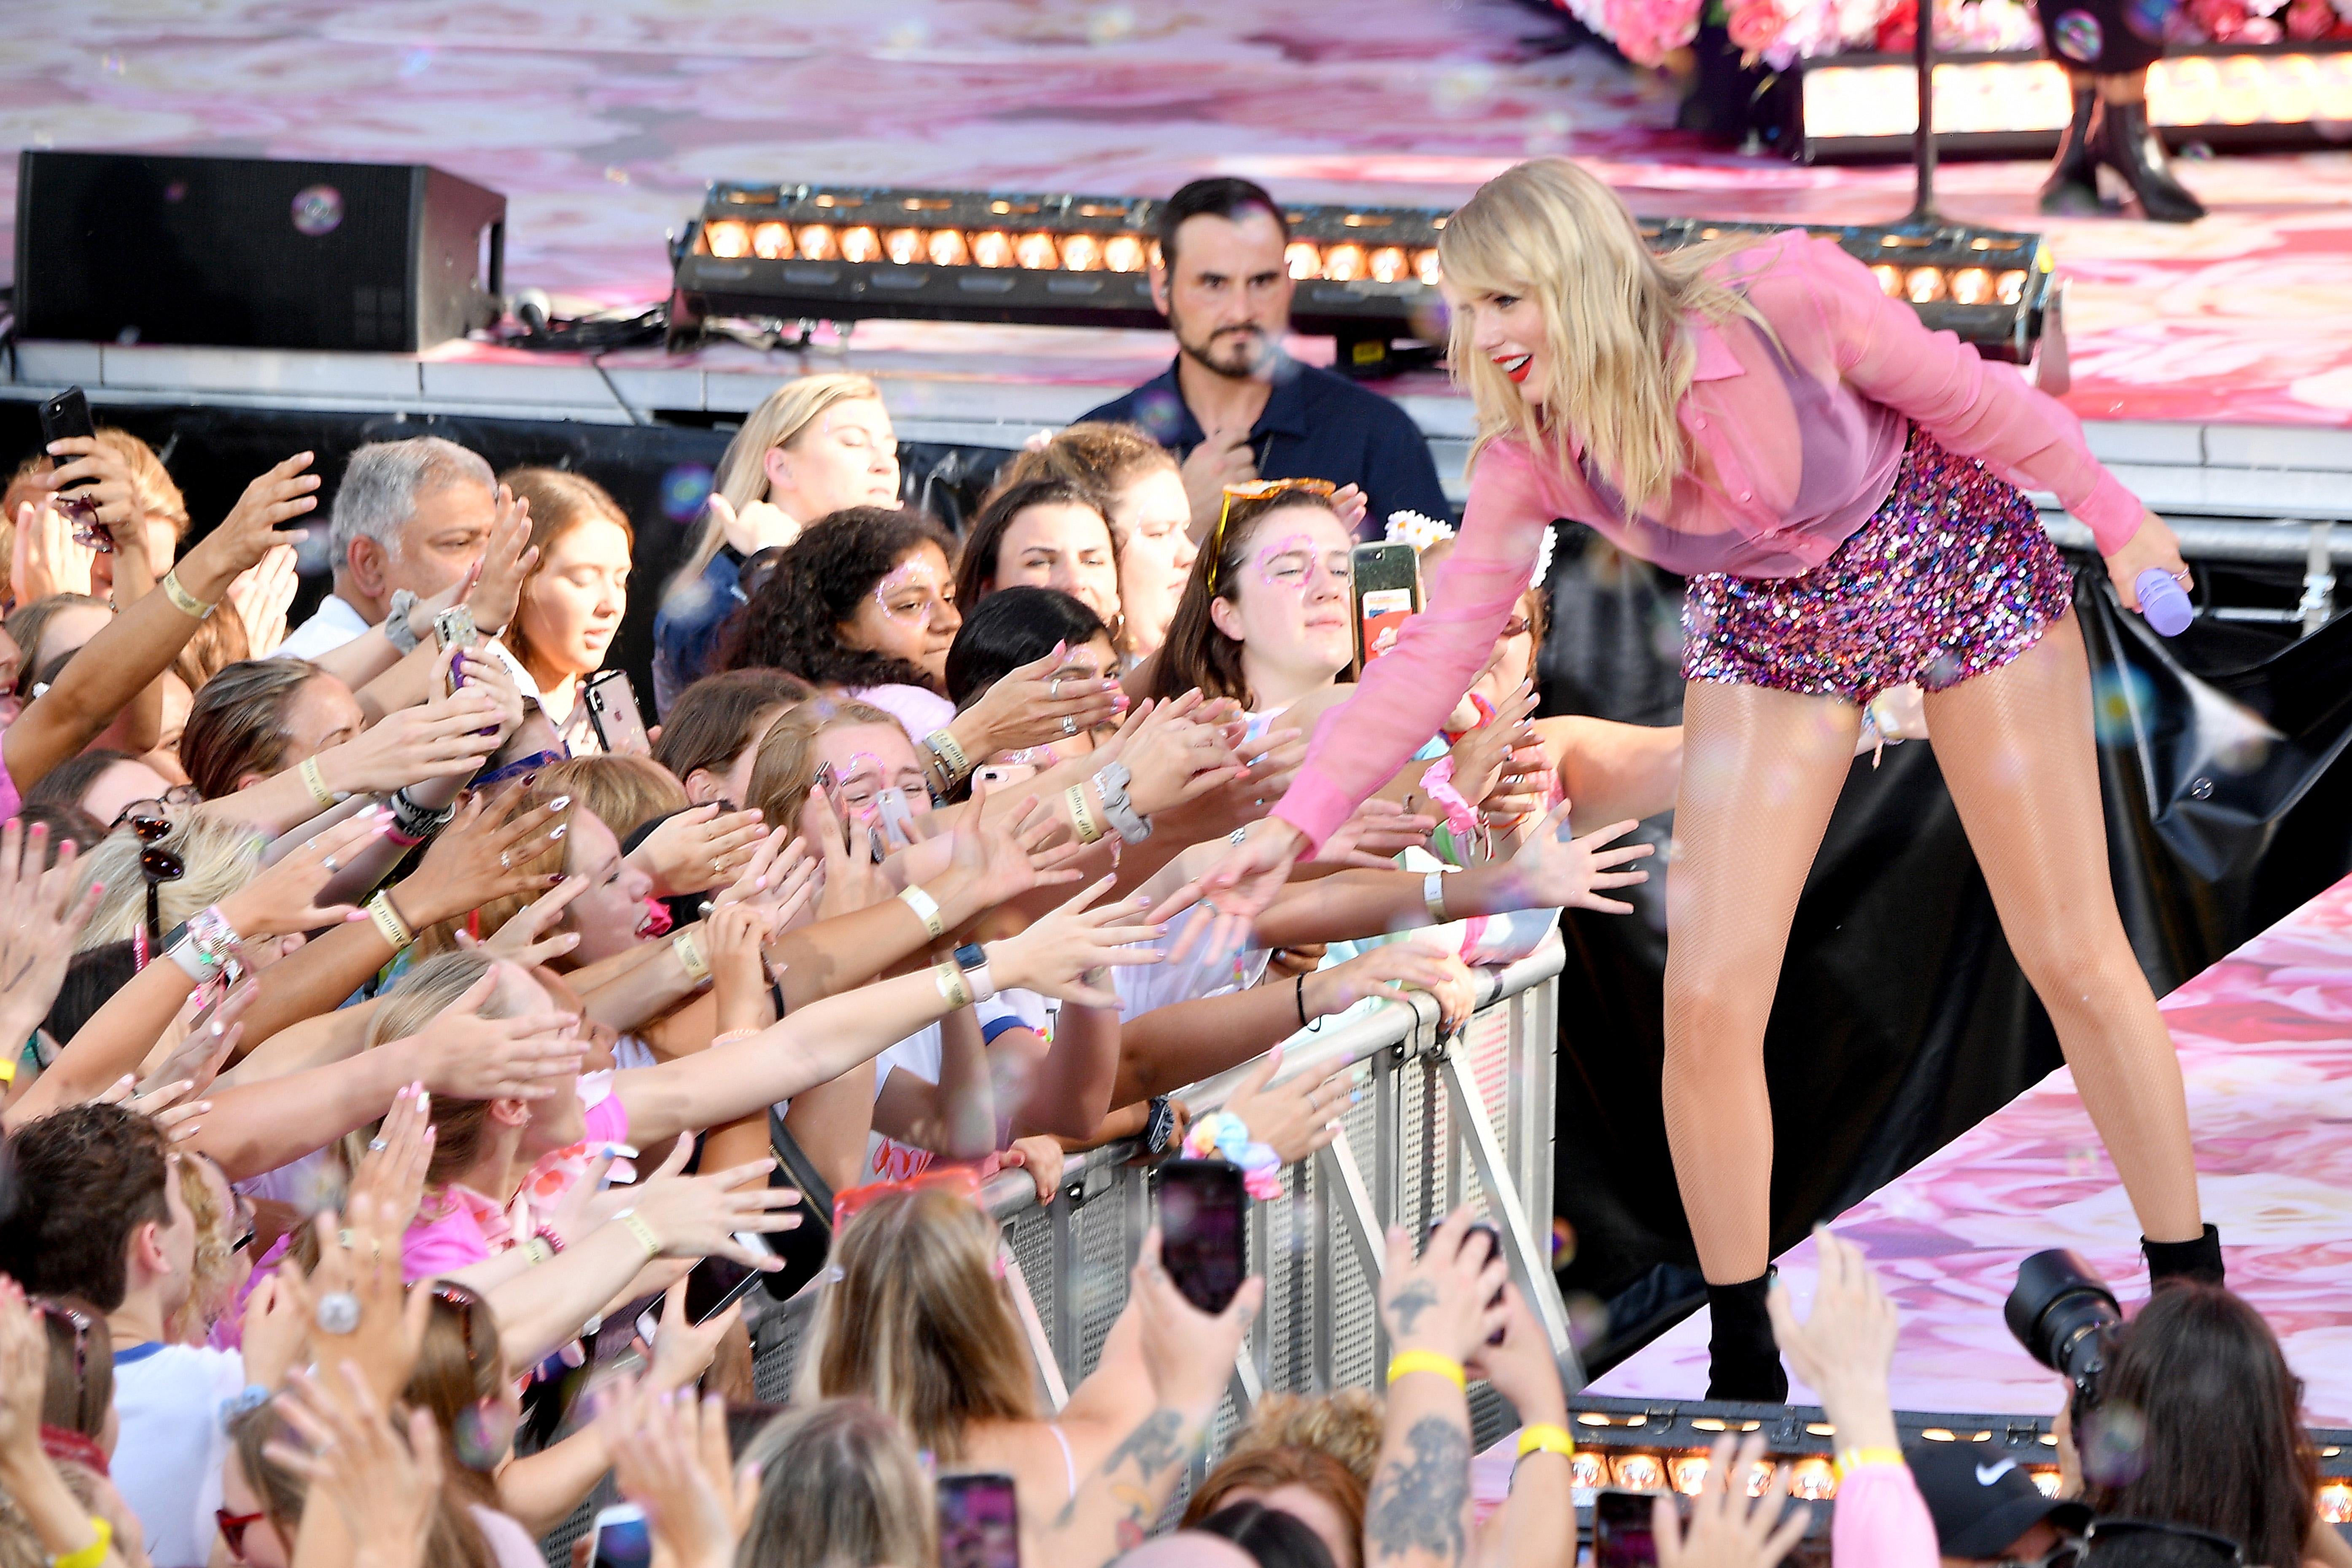 Taylor Swift leans down from a stage to touch fans' hands.